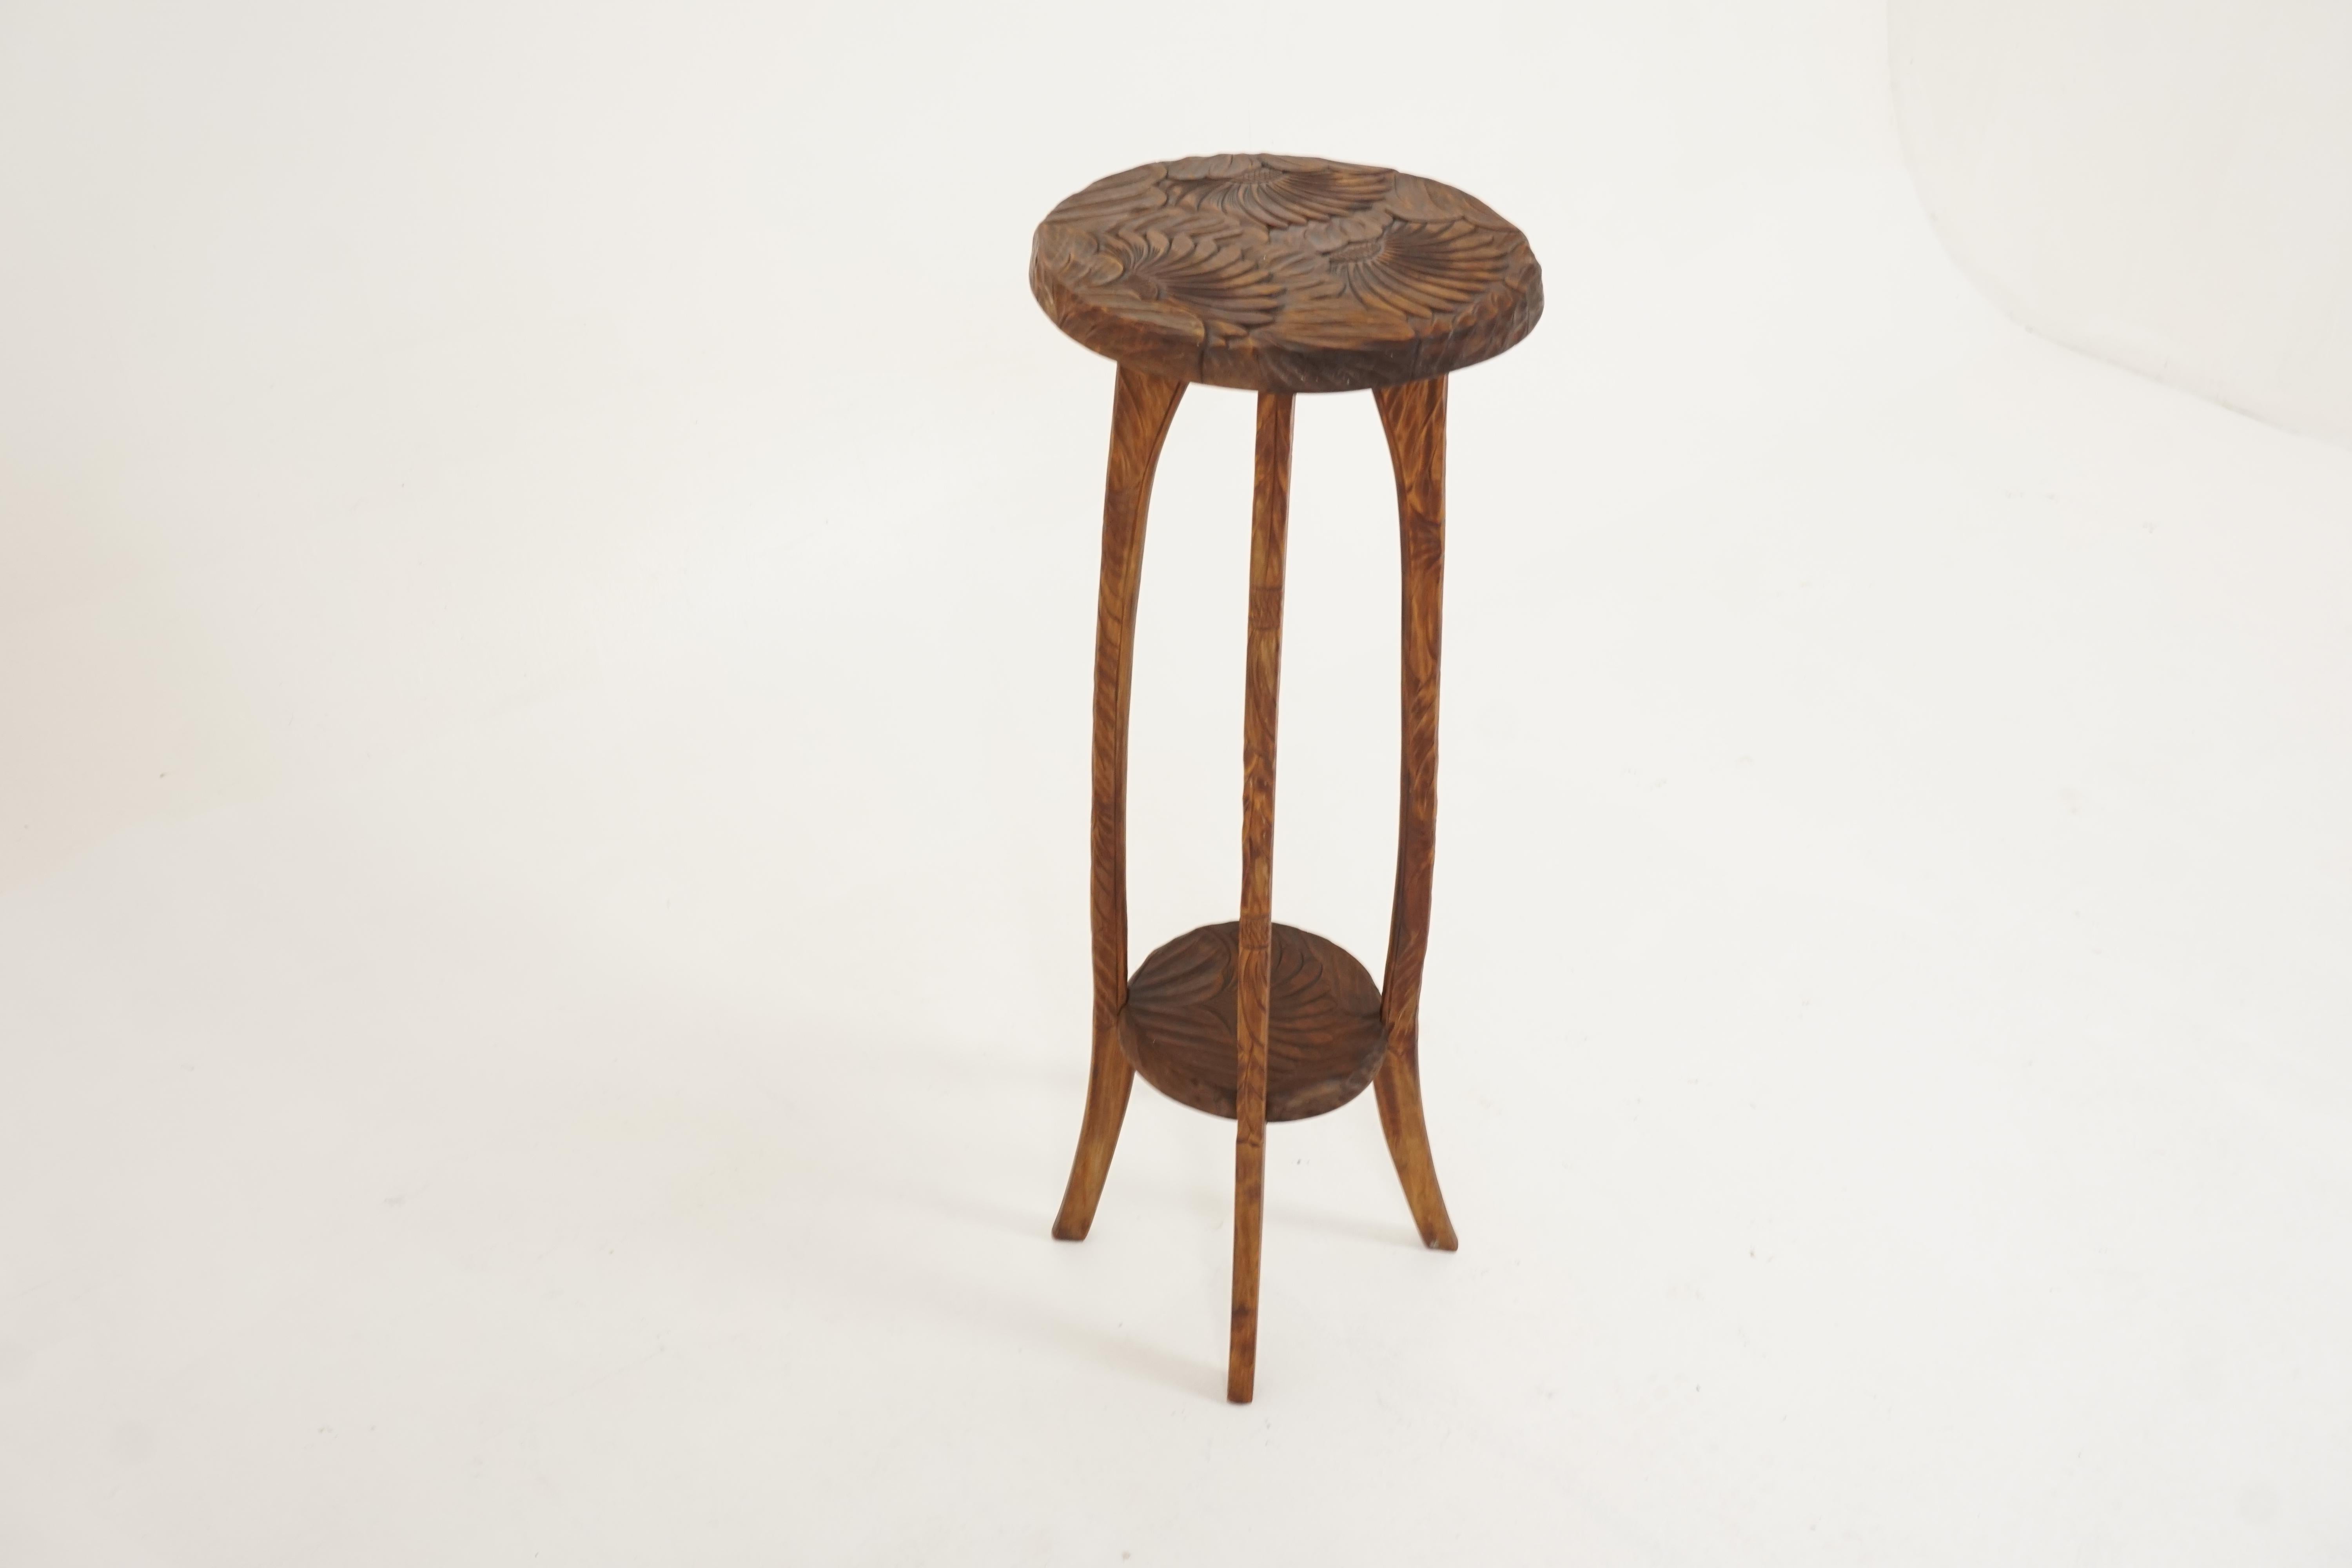 Antique tall plant stand, Liberty's London, carved mahogany, Japan 1905, B2206

Japan 1905
Solid mahogany
Hand carved top
Four elegant tall legs with carved circular shelf below
All joints are tight
Lovely quality and in good